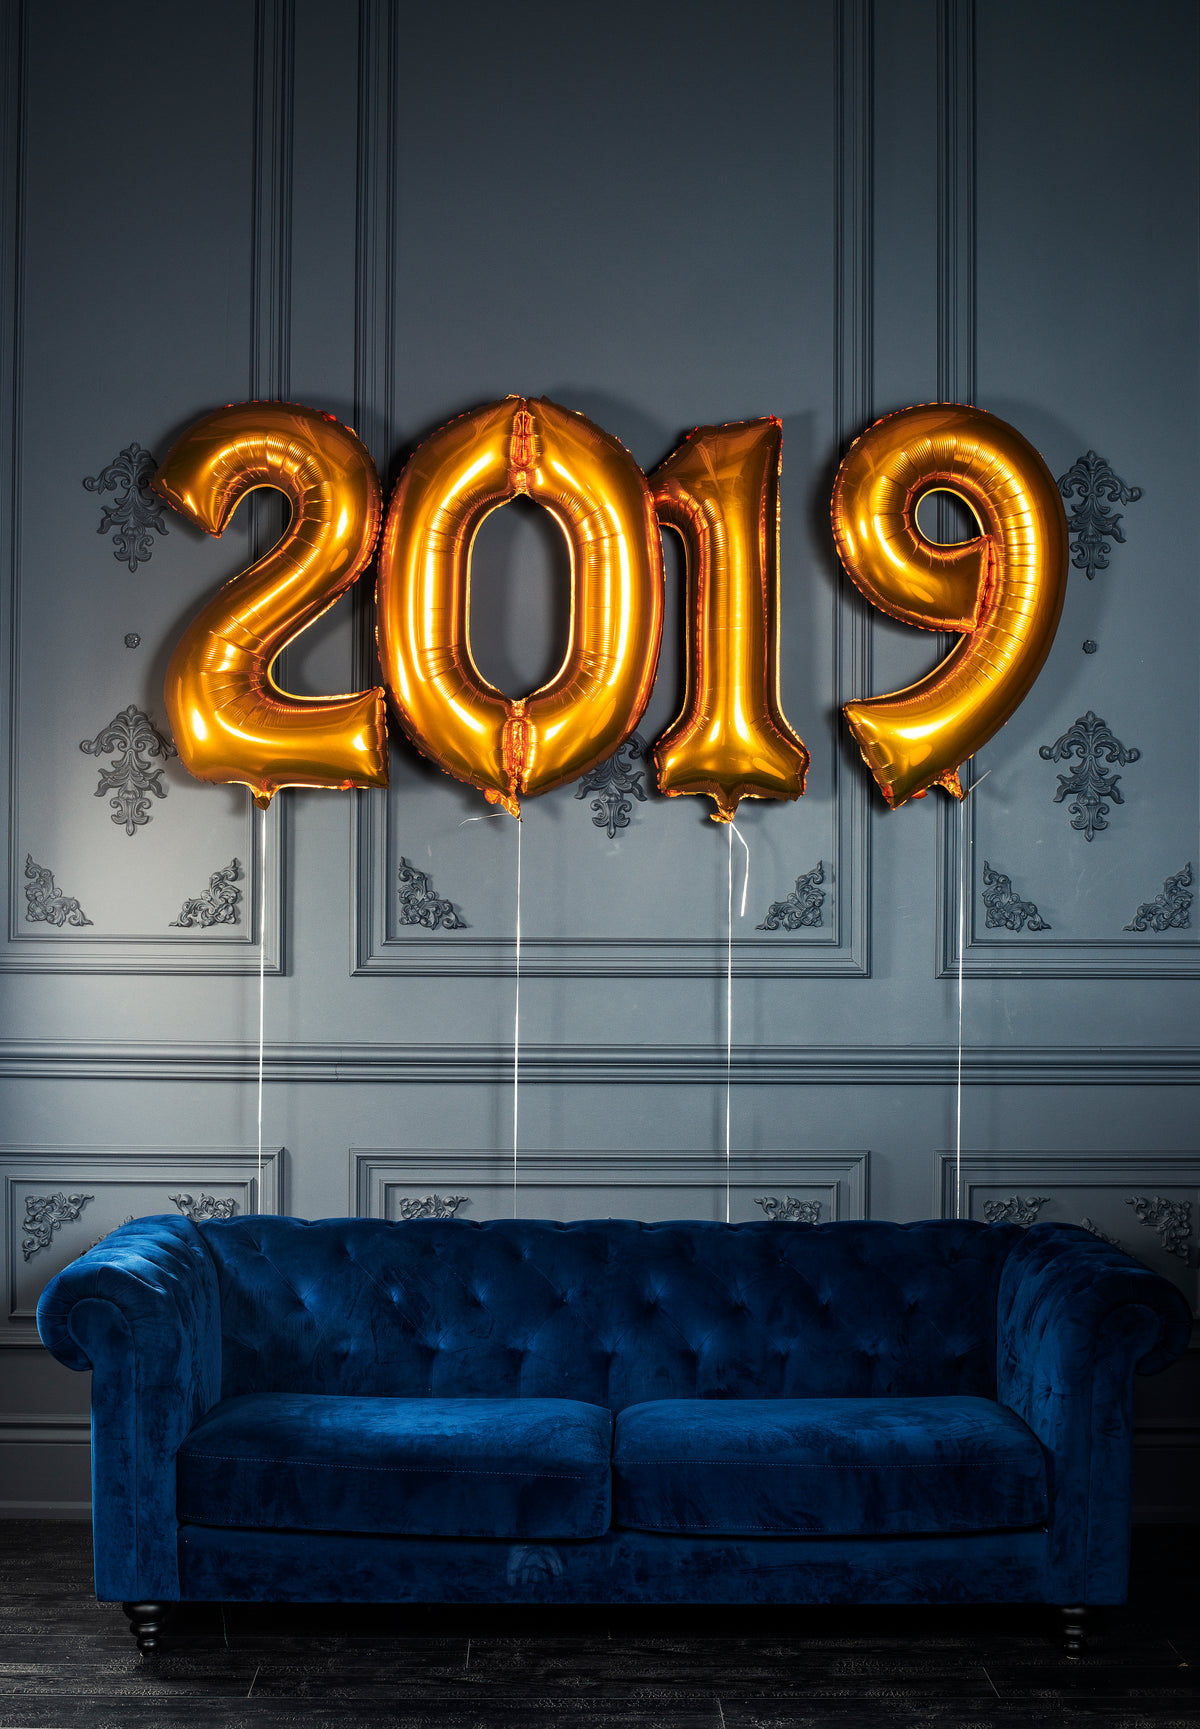 blue velvet couch with helium 2019 balloons